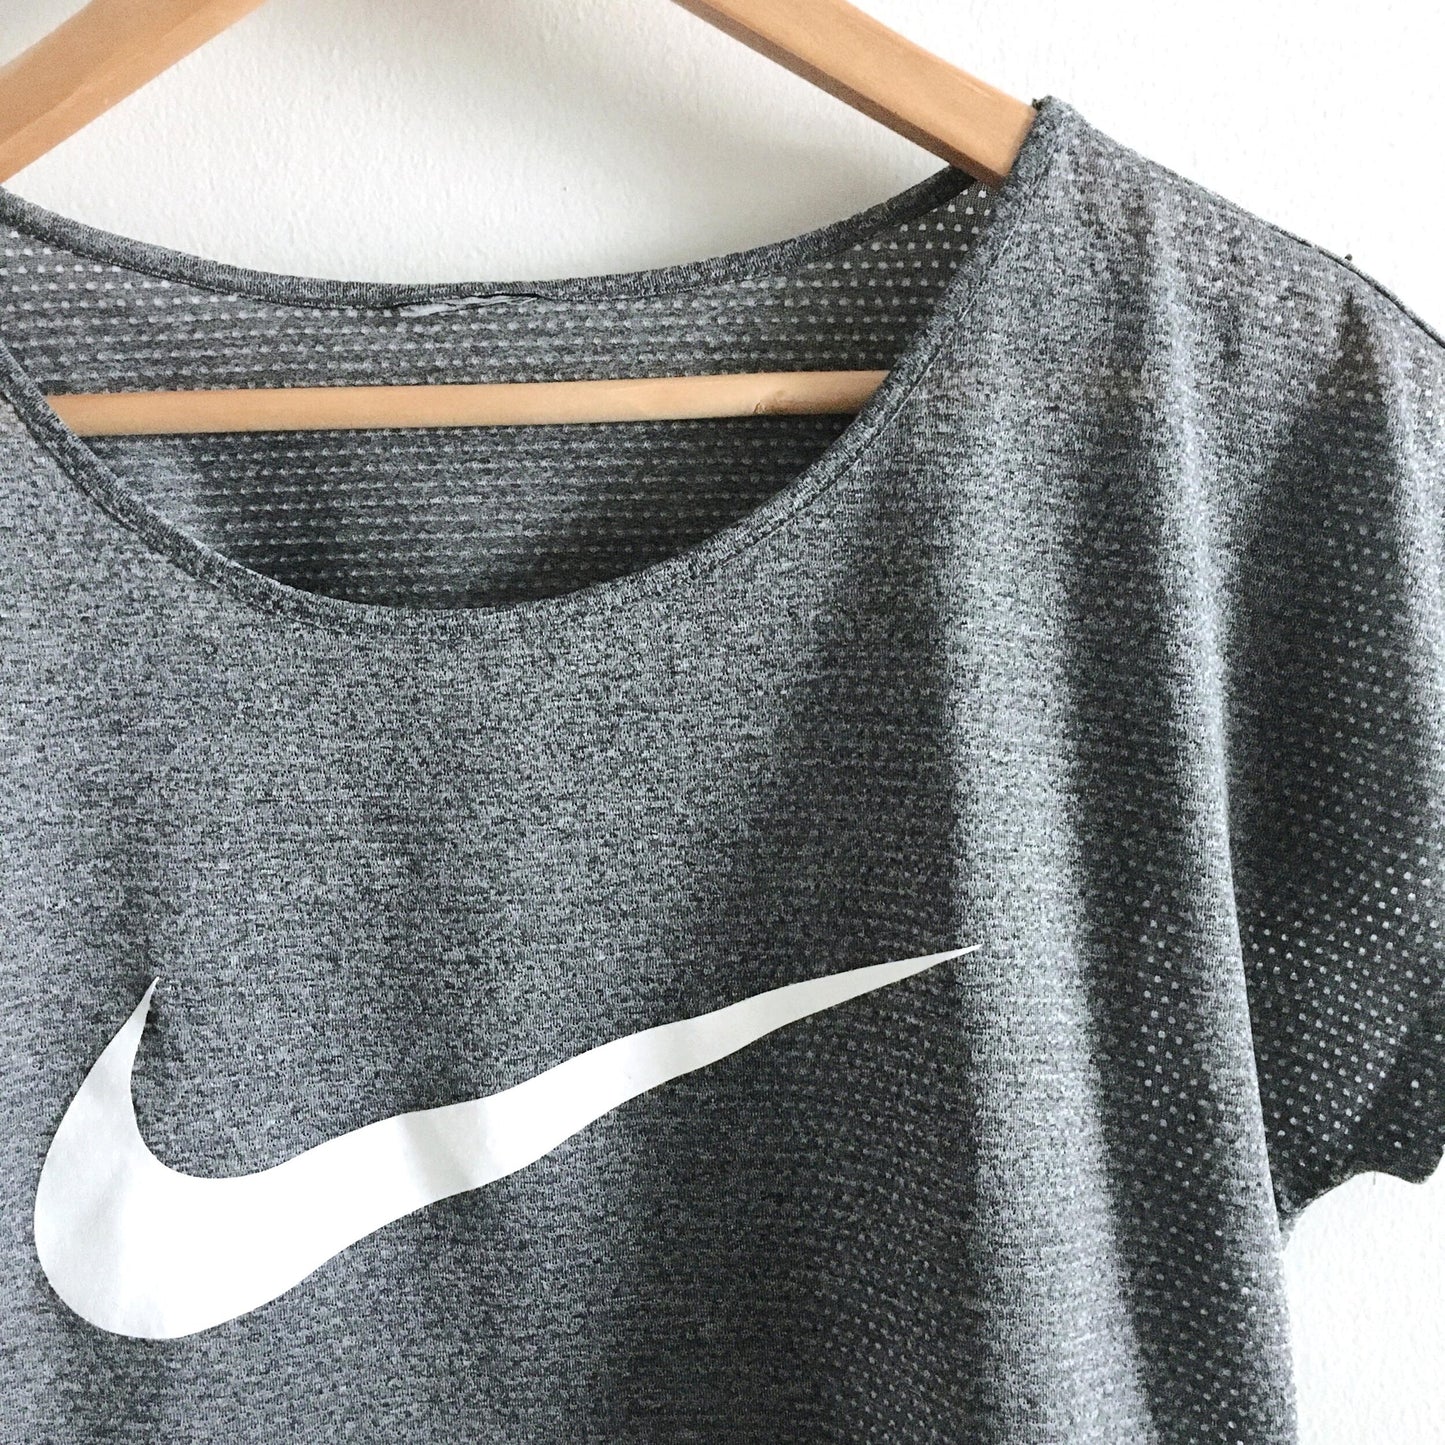 Nike City Cool Swoosh Running Crop Top - size Small